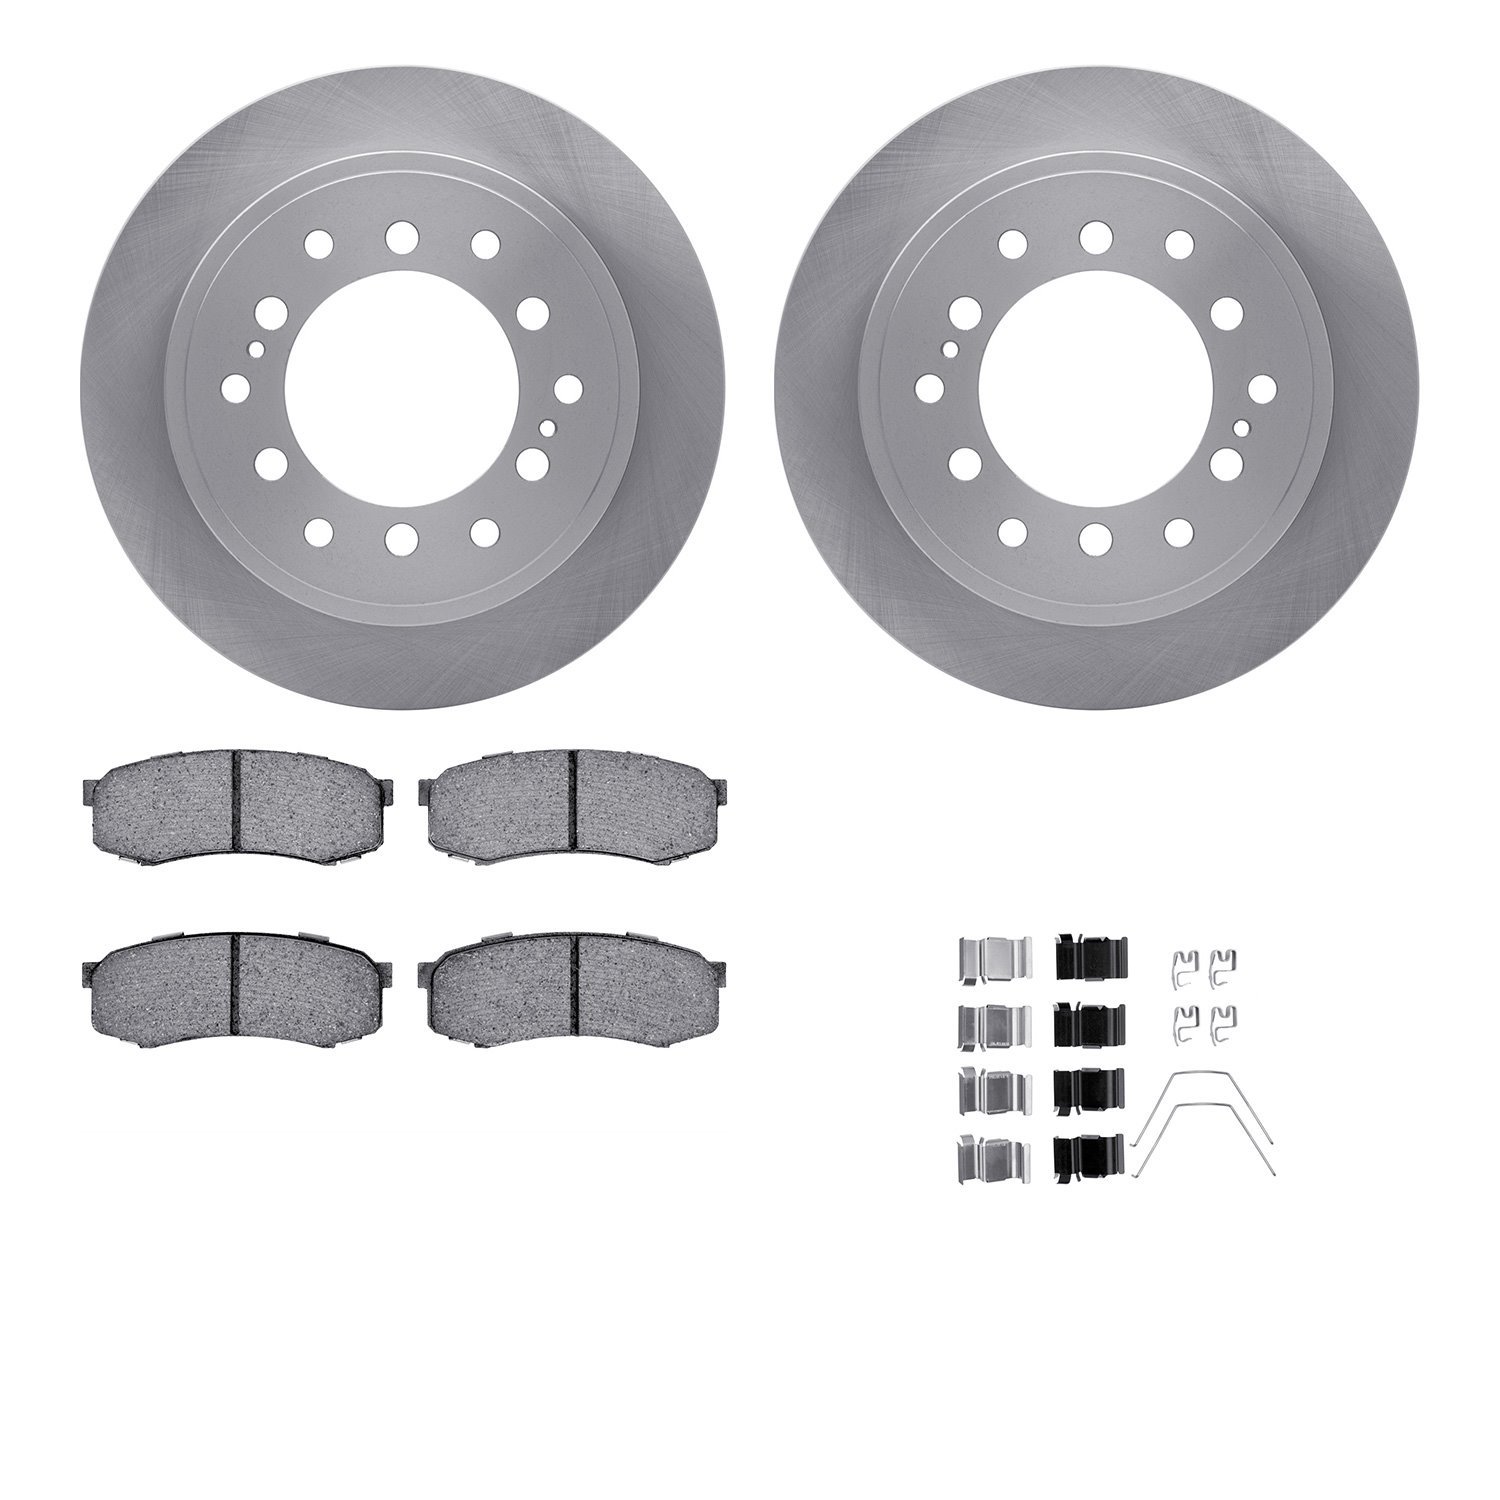 6312-76100 Brake Rotors with 3000-Series Ceramic Brake Pads Kit with Hardware, Fits Select Lexus/Toyota/Scion, Position: Rear